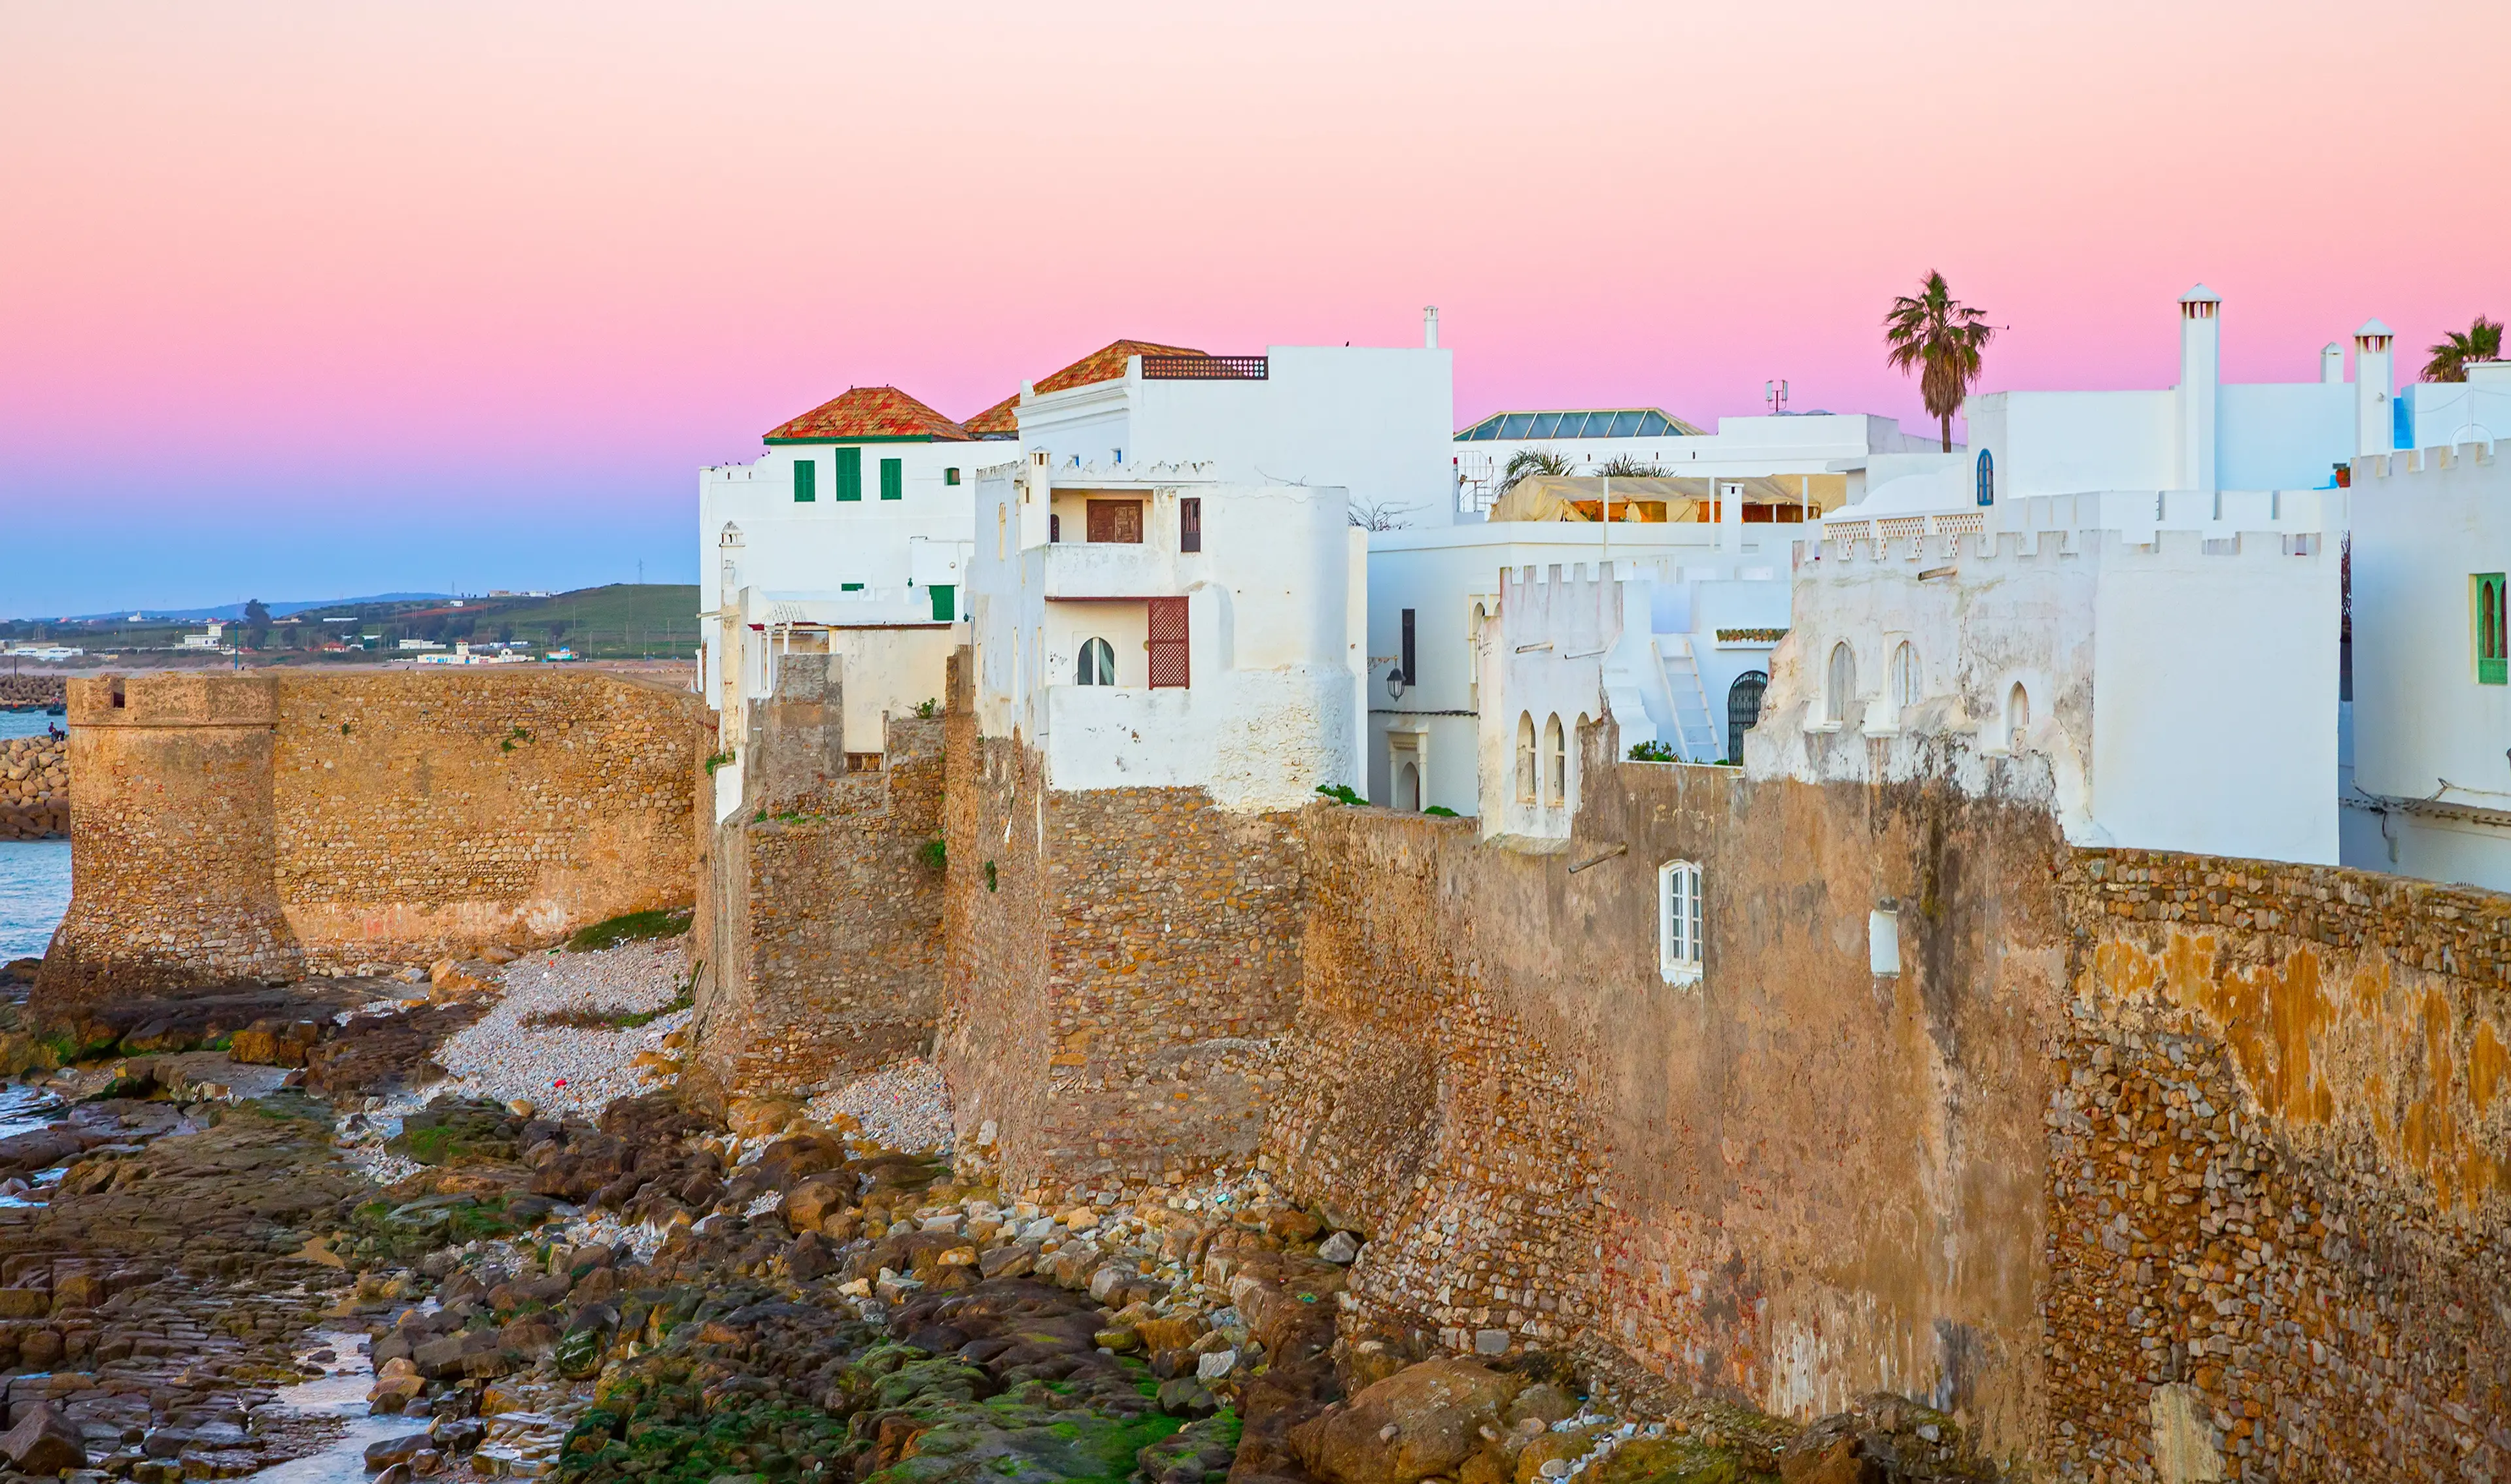 2-Day Solo Adventure in Asilah, Morocco: Unexplored Outdoors